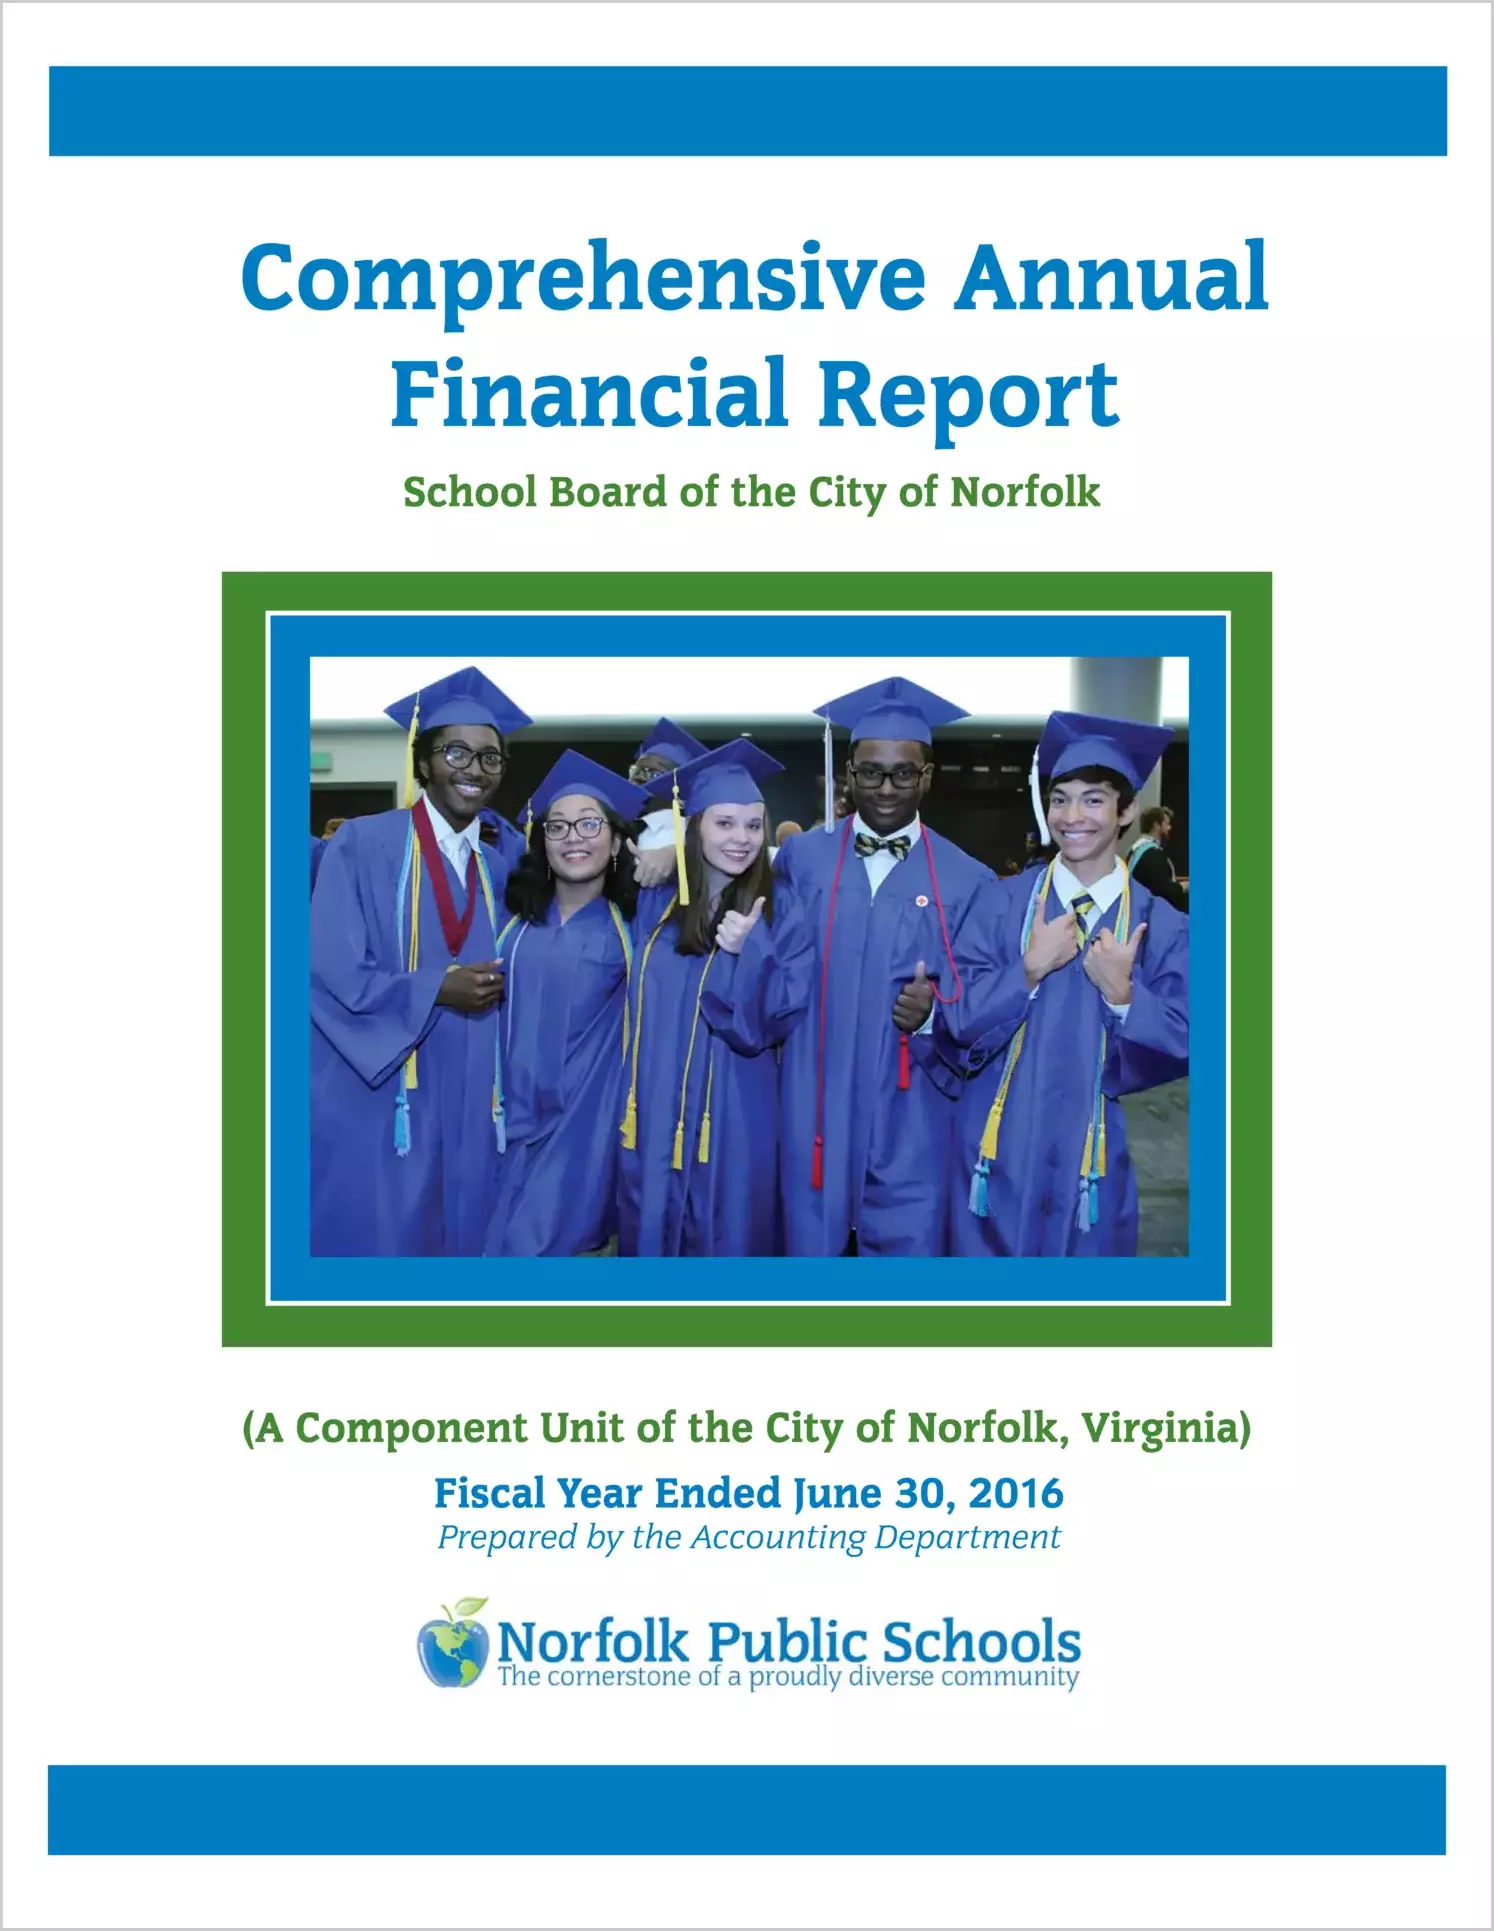 2016 Public Schools Annual Financial Report for City of Norfolk